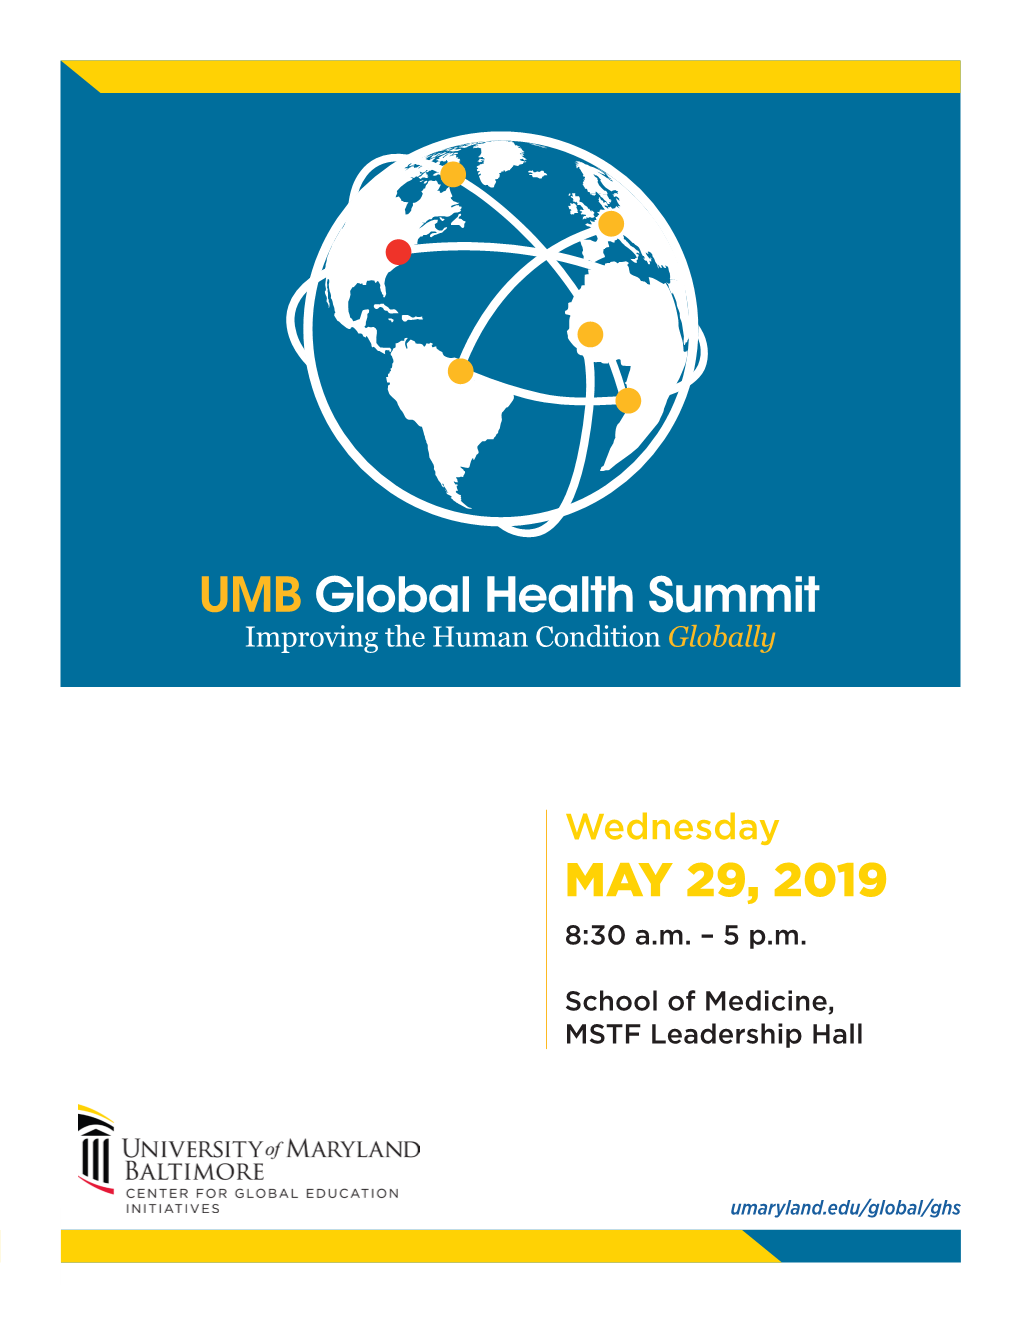 UMB Global Health Summit Improving the Human Condition Globally